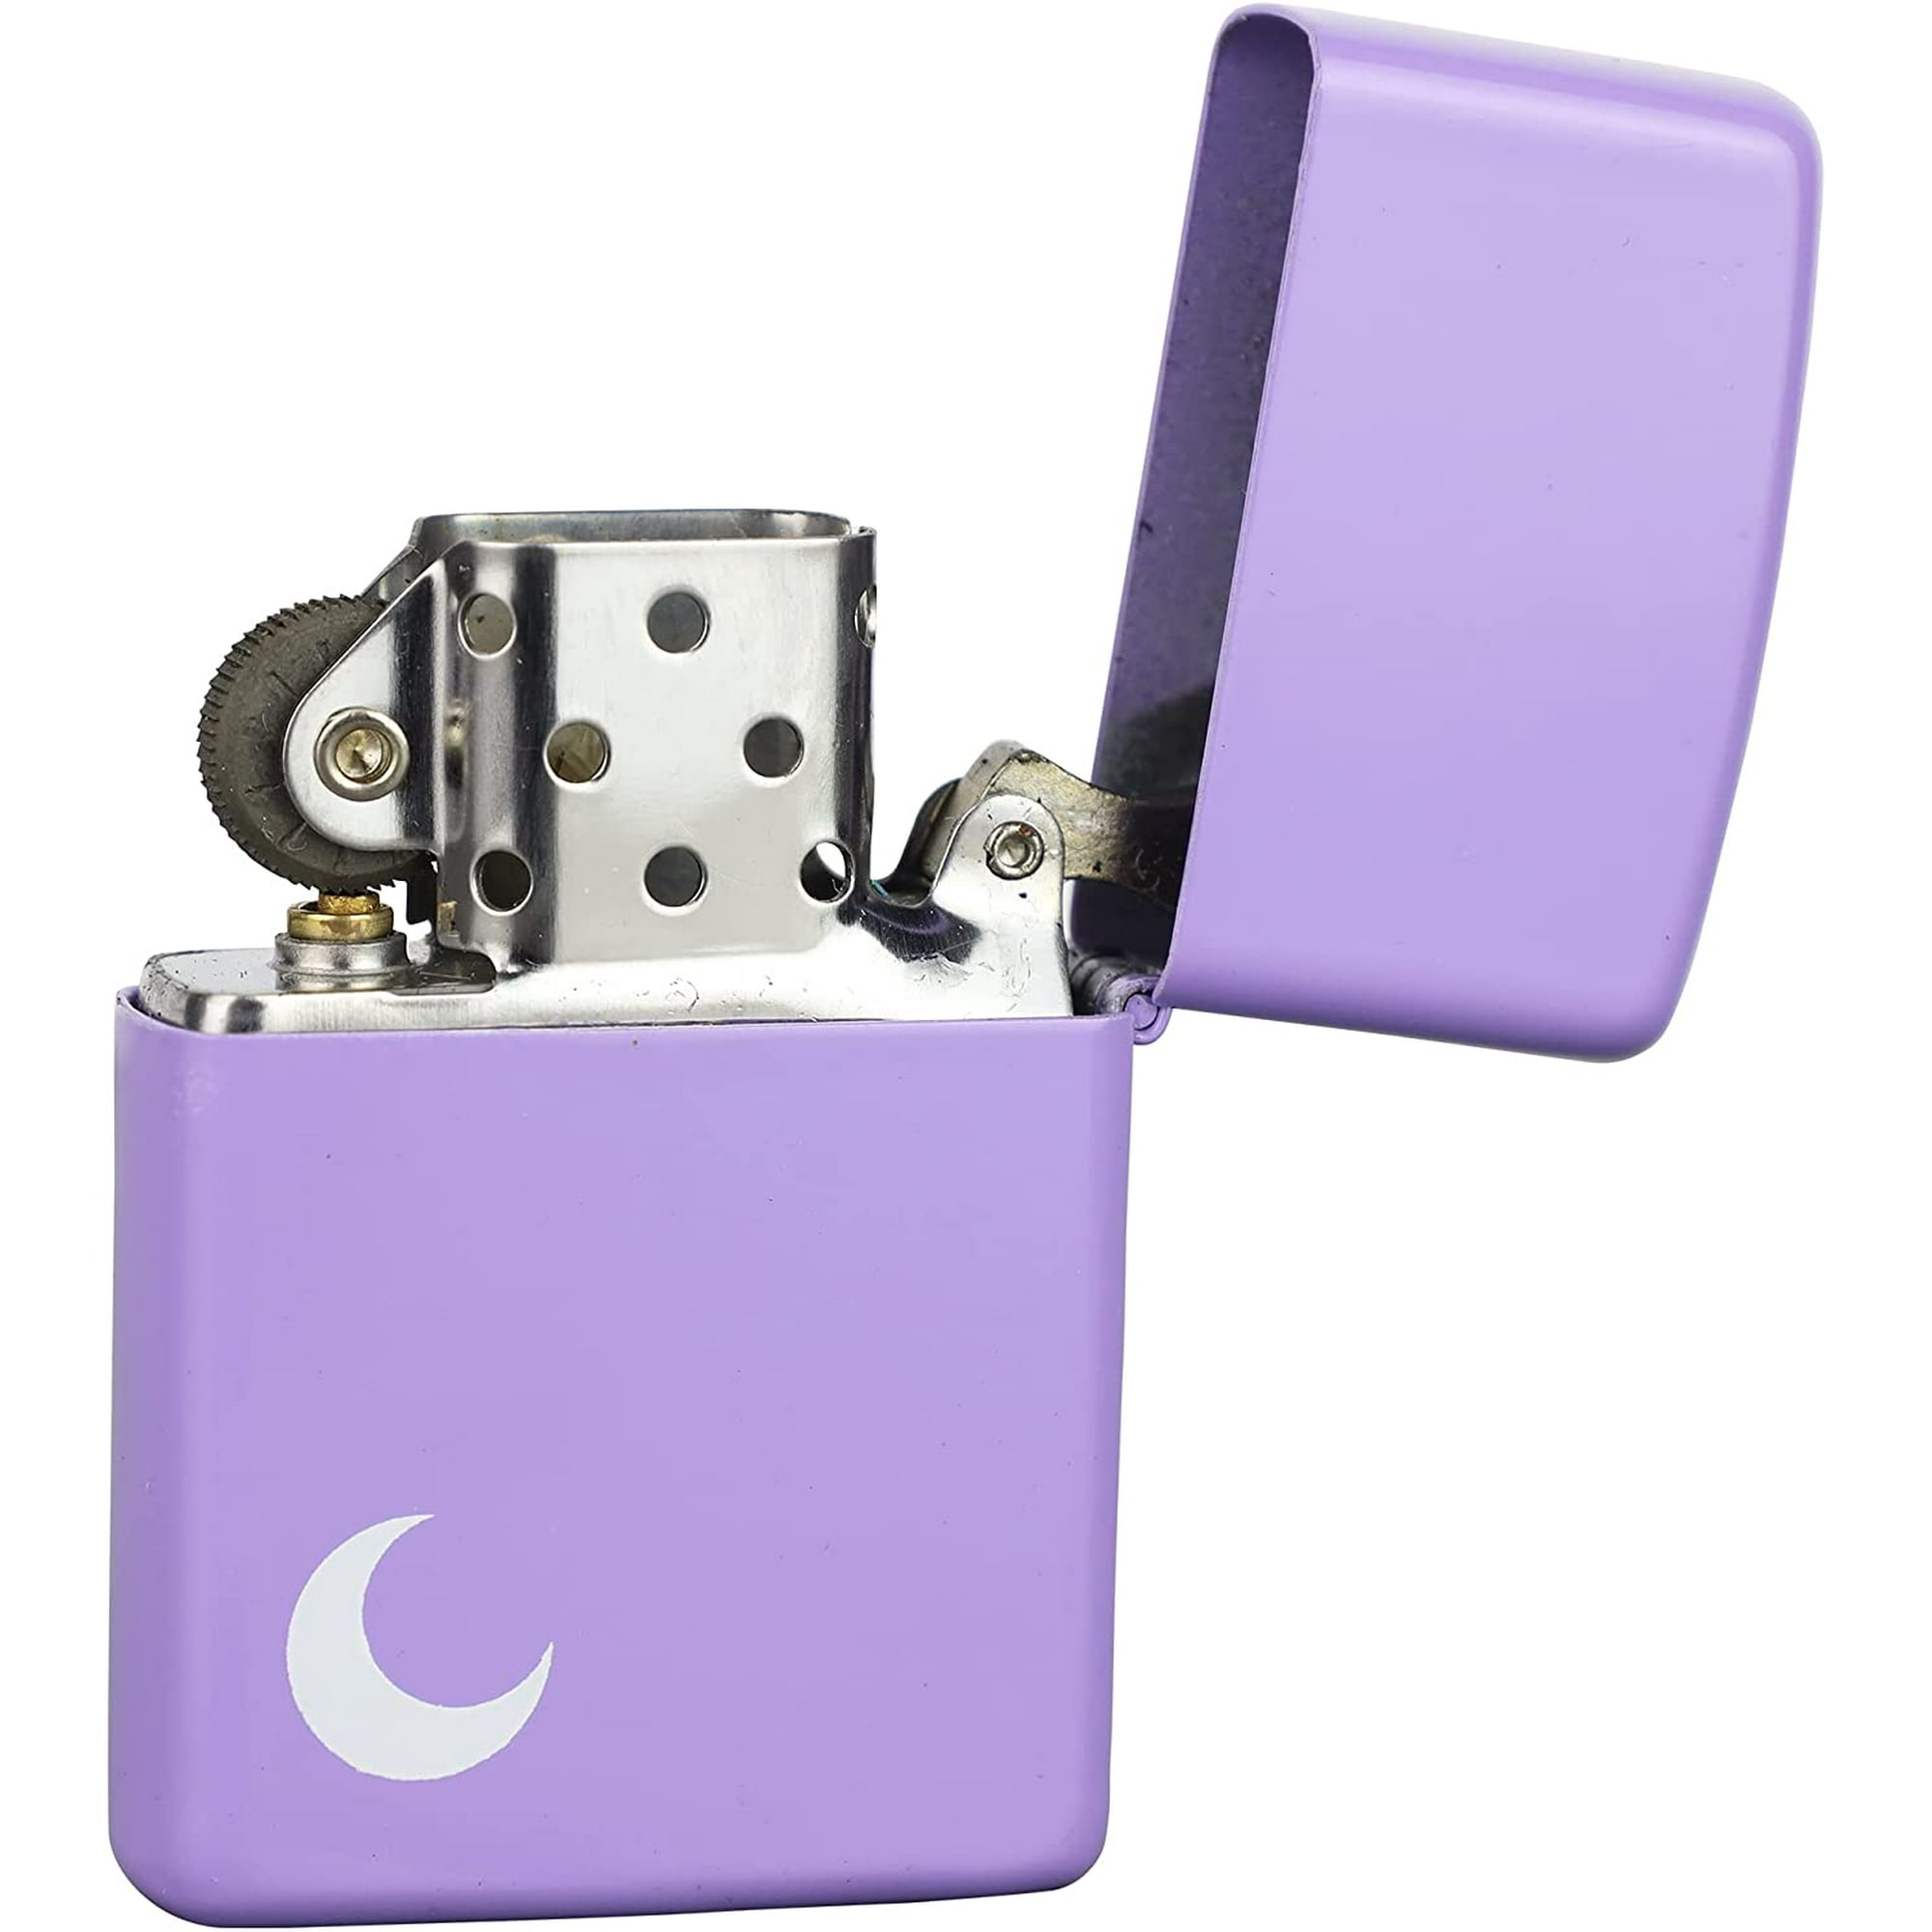 Antique Style Metal Flip Top Oil Lighter with Pink Moon Refillable Windproof Pocket Lighter – Comes with Aluminum Gift Case & Empty Without Oil – Size 5.6 * 3.8 * 1.2cm | Walmart Canada